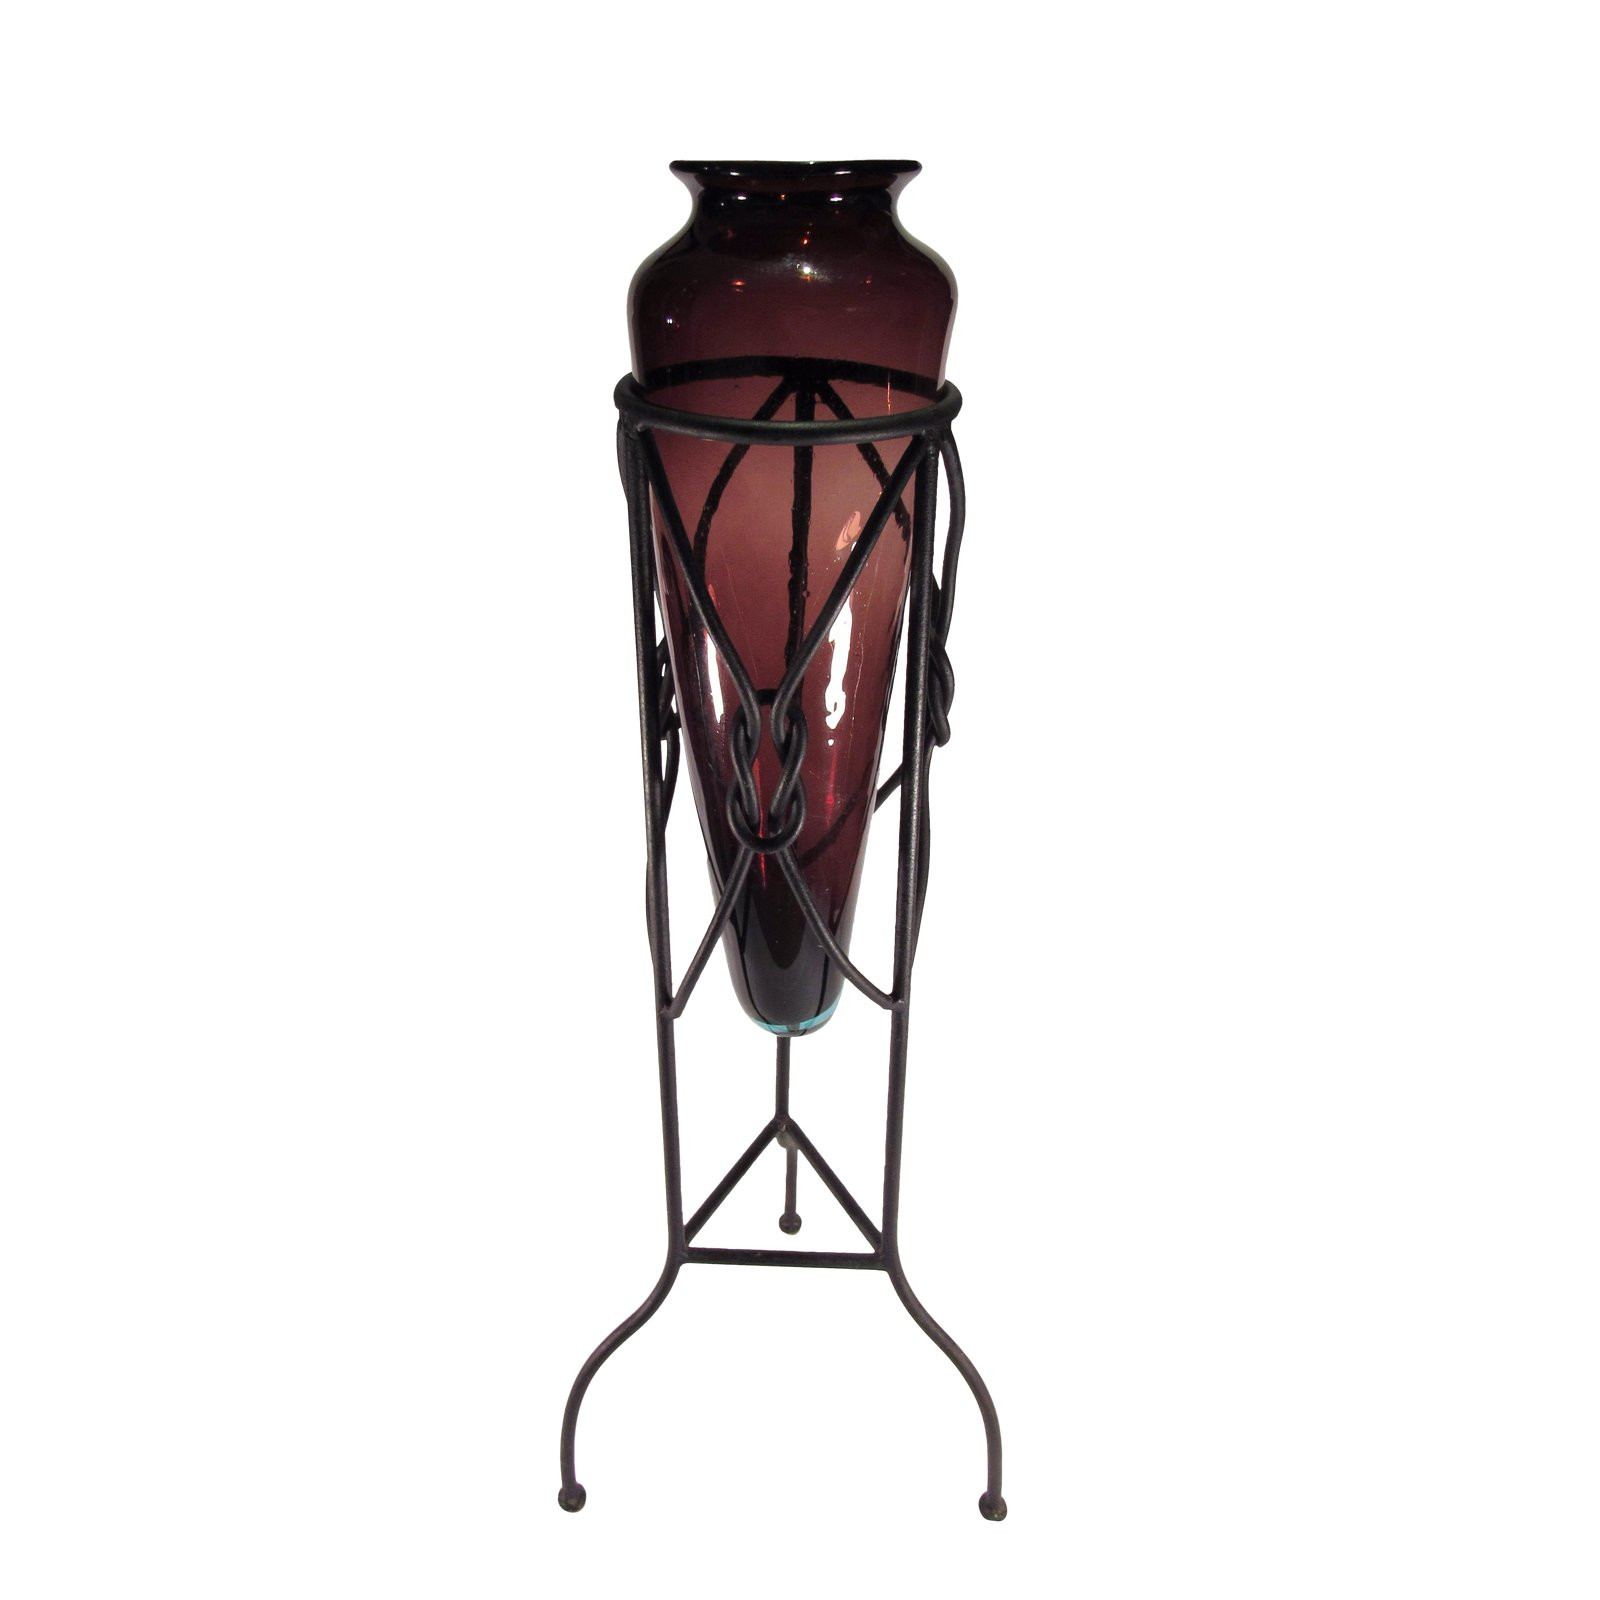 12 Cute Floor Standing Glass Vase 2023 free download floor standing glass vase of large amphora style glass vase in iron tripod stand chairish throughout large amphora style glass vase in iron tripod stand 8677